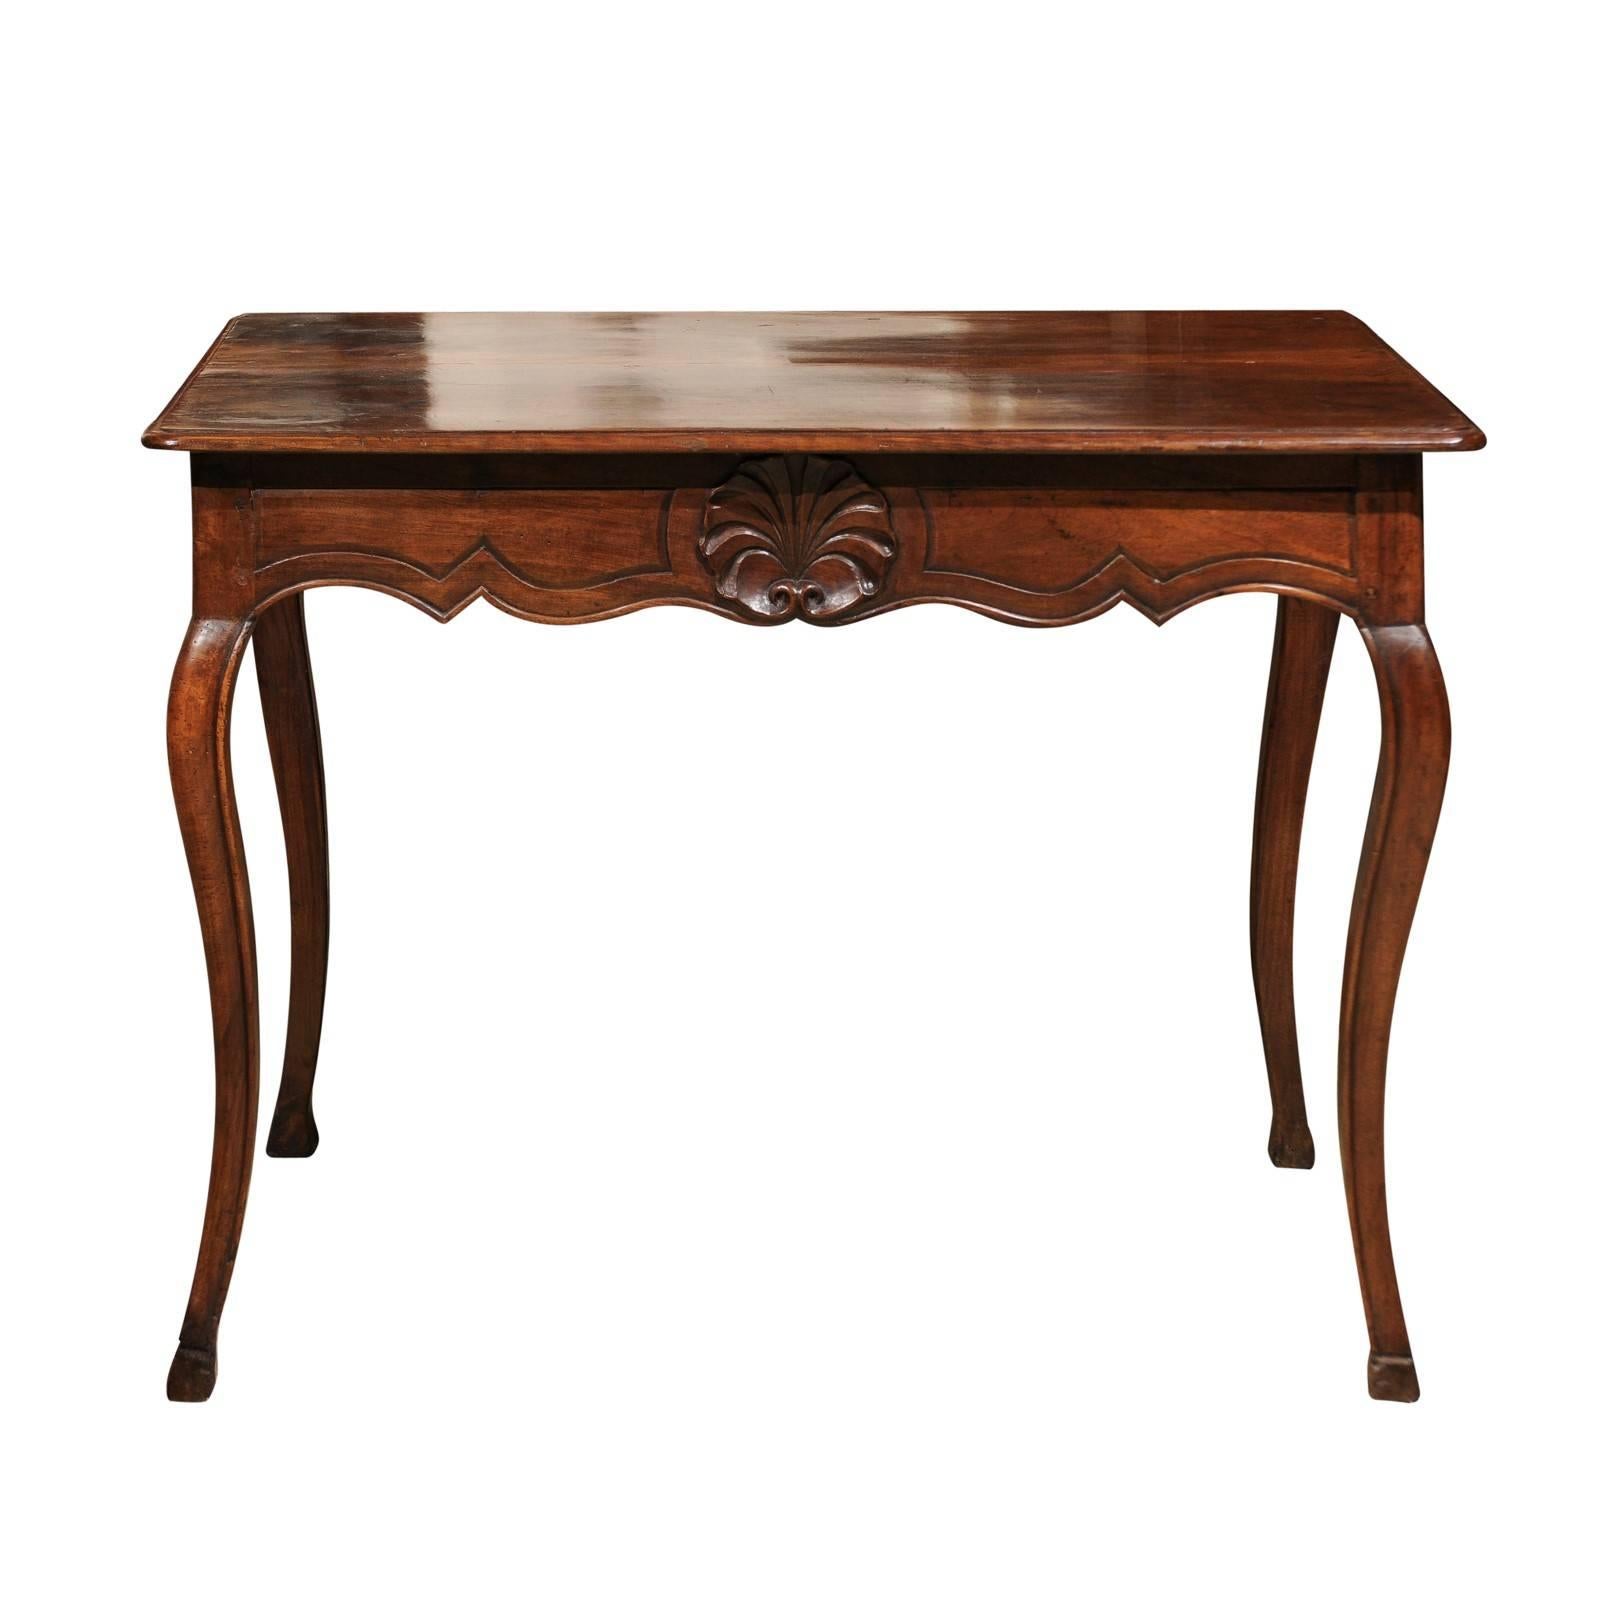 18th Century French Louis XV Walnut Table with Shell Carving & Side Drawer